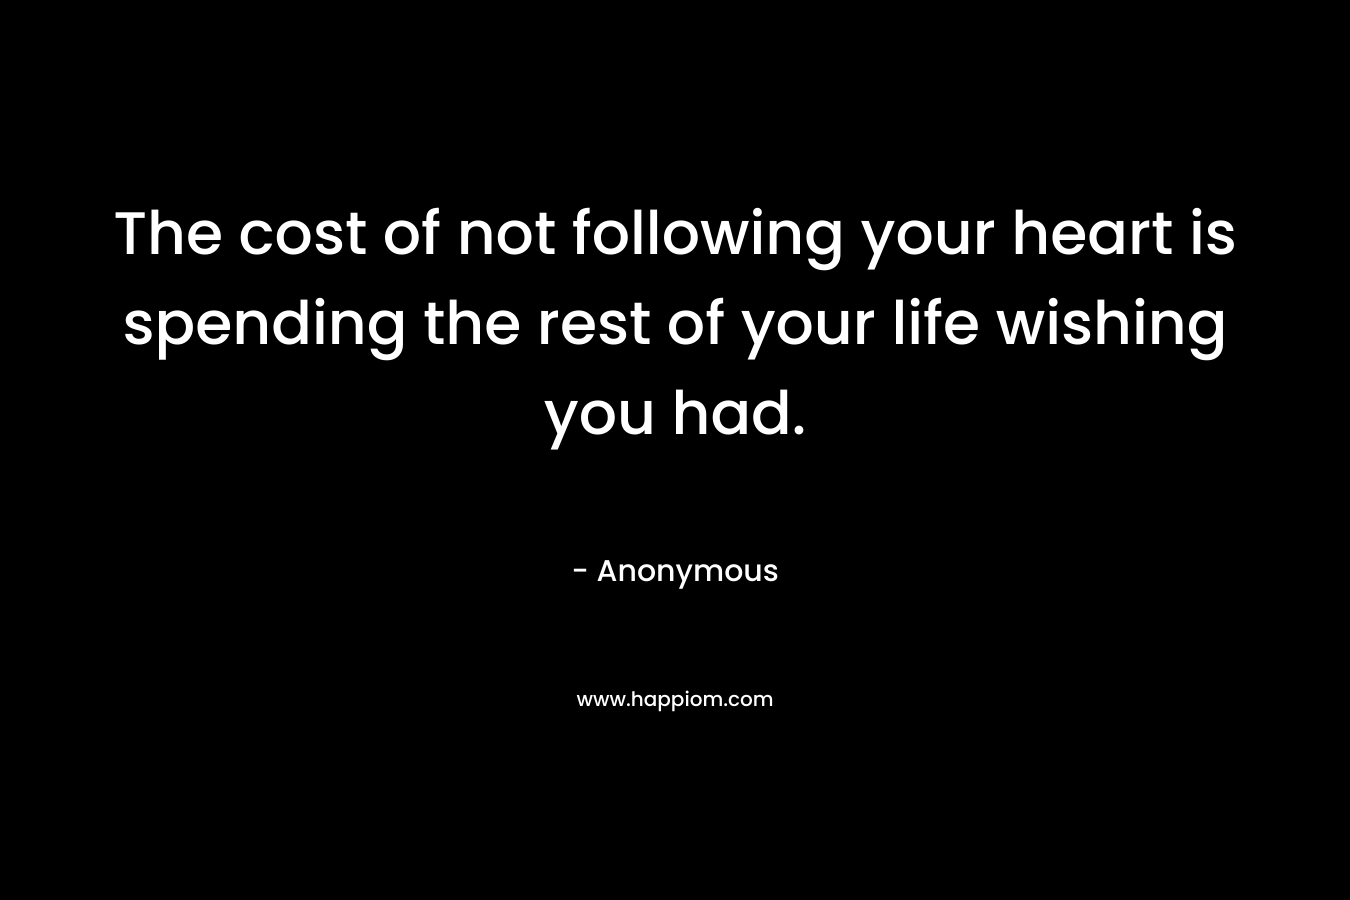 The cost of not following your heart is spending the rest of your life wishing you had. – Anonymous